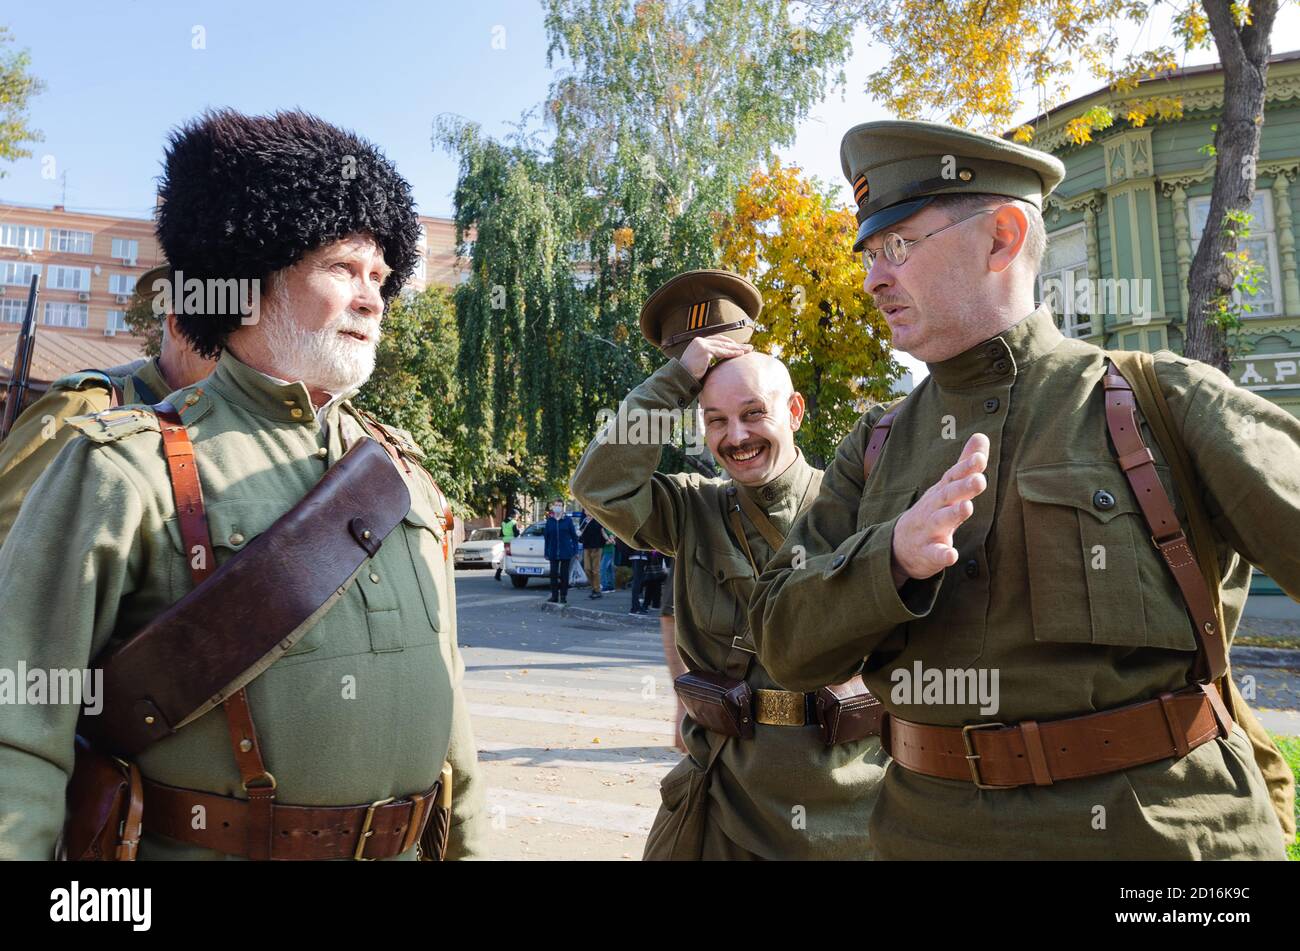 Historical festival dedicated to the events of the Russian civil war. A group of participants in the White army uniform. Samara, Russia October 3 Stock Photo